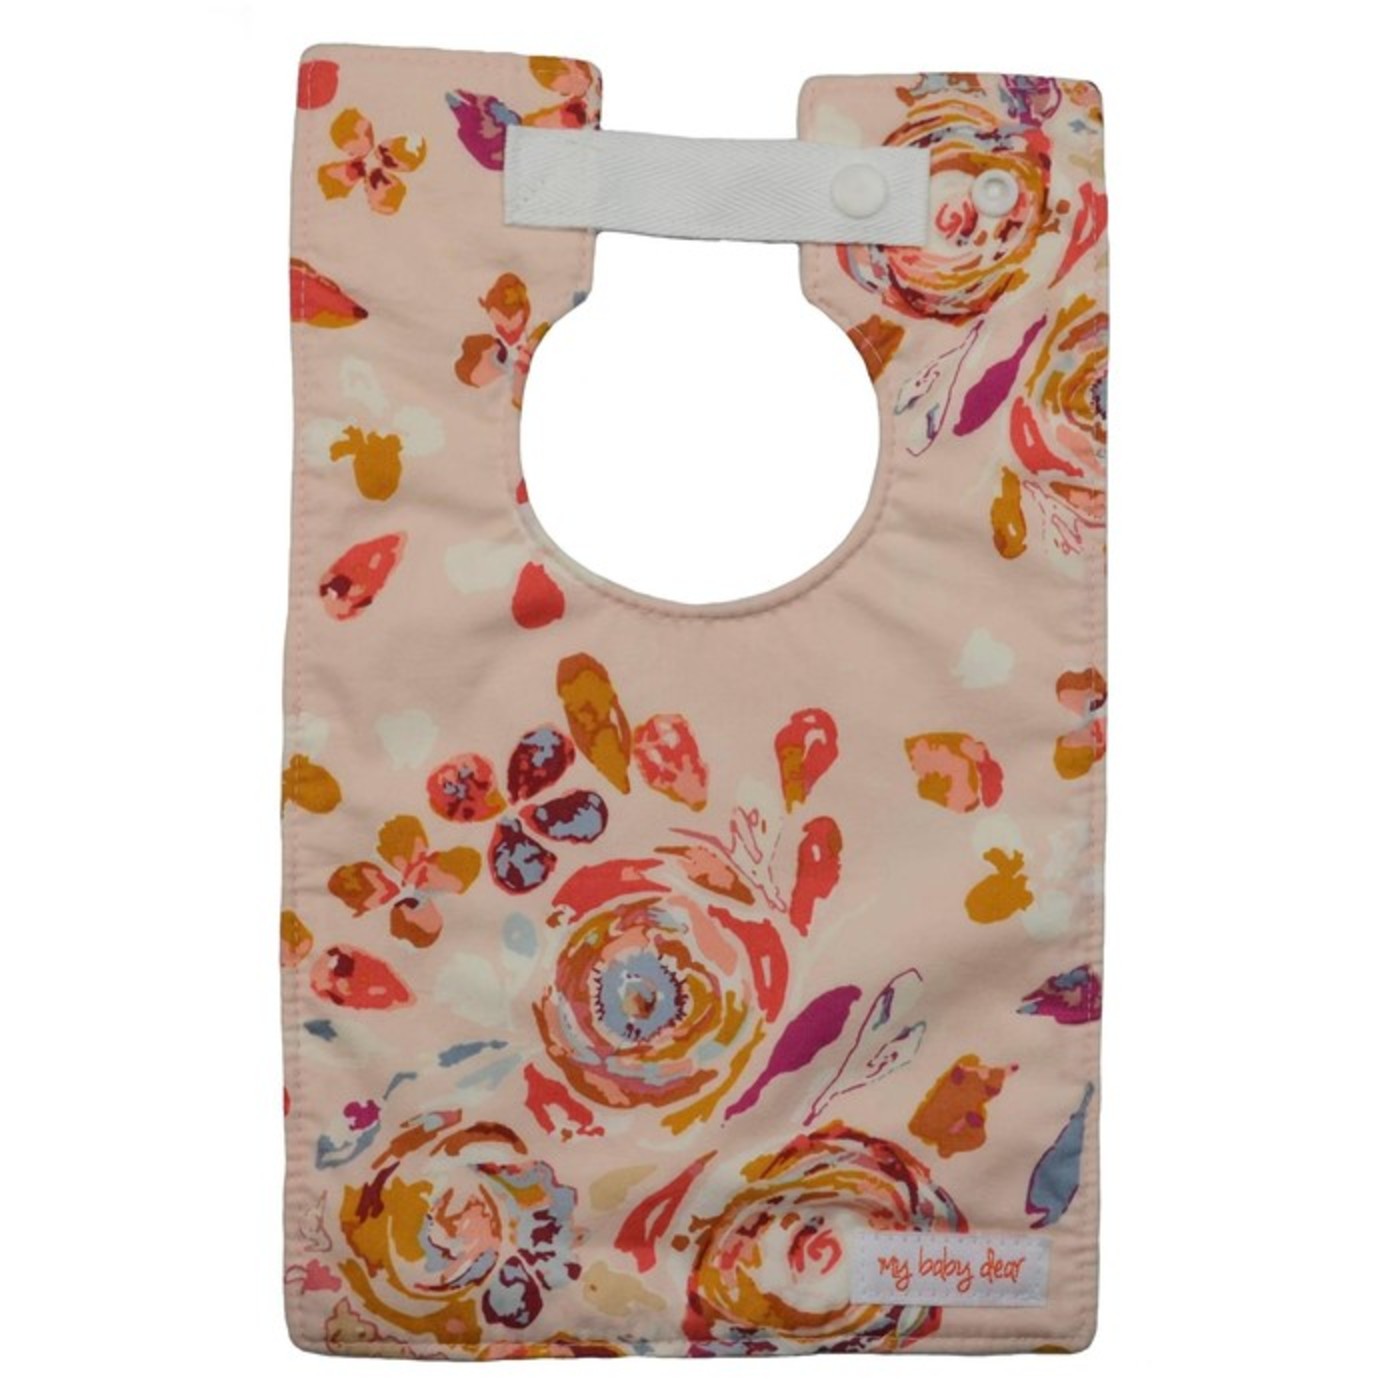 Maggie Floral Large Style Bib